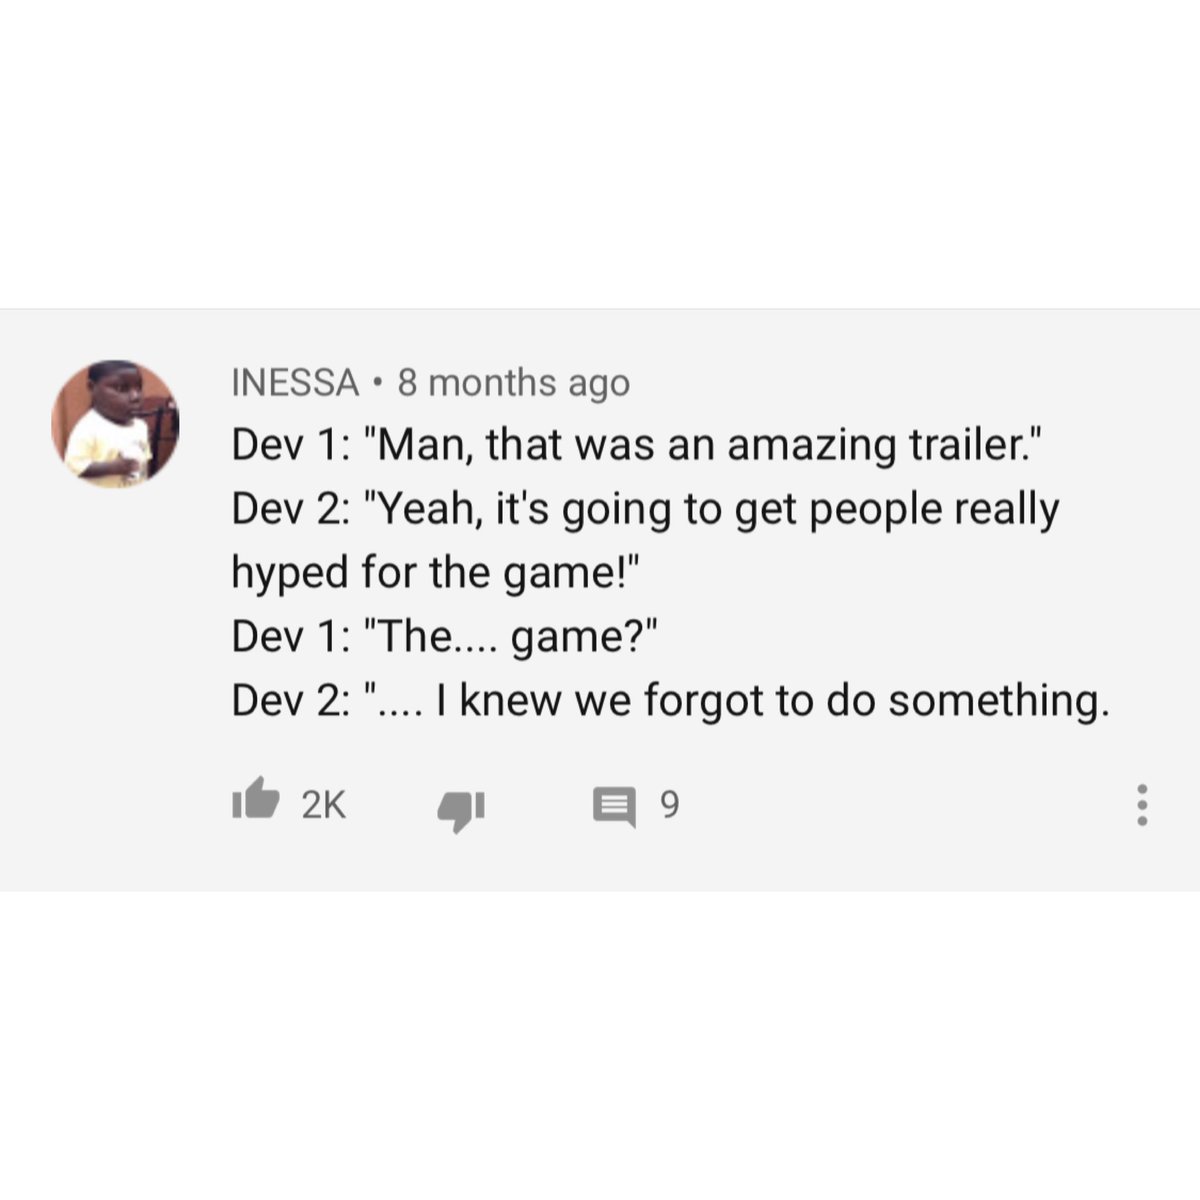 Dead Island’s trailer was a huge hit, going viral instantly.Problem: the final game didn’t really pay it off. Nowhere close to as emotional or narrative driven. Here's the top 2 YouTube comments.